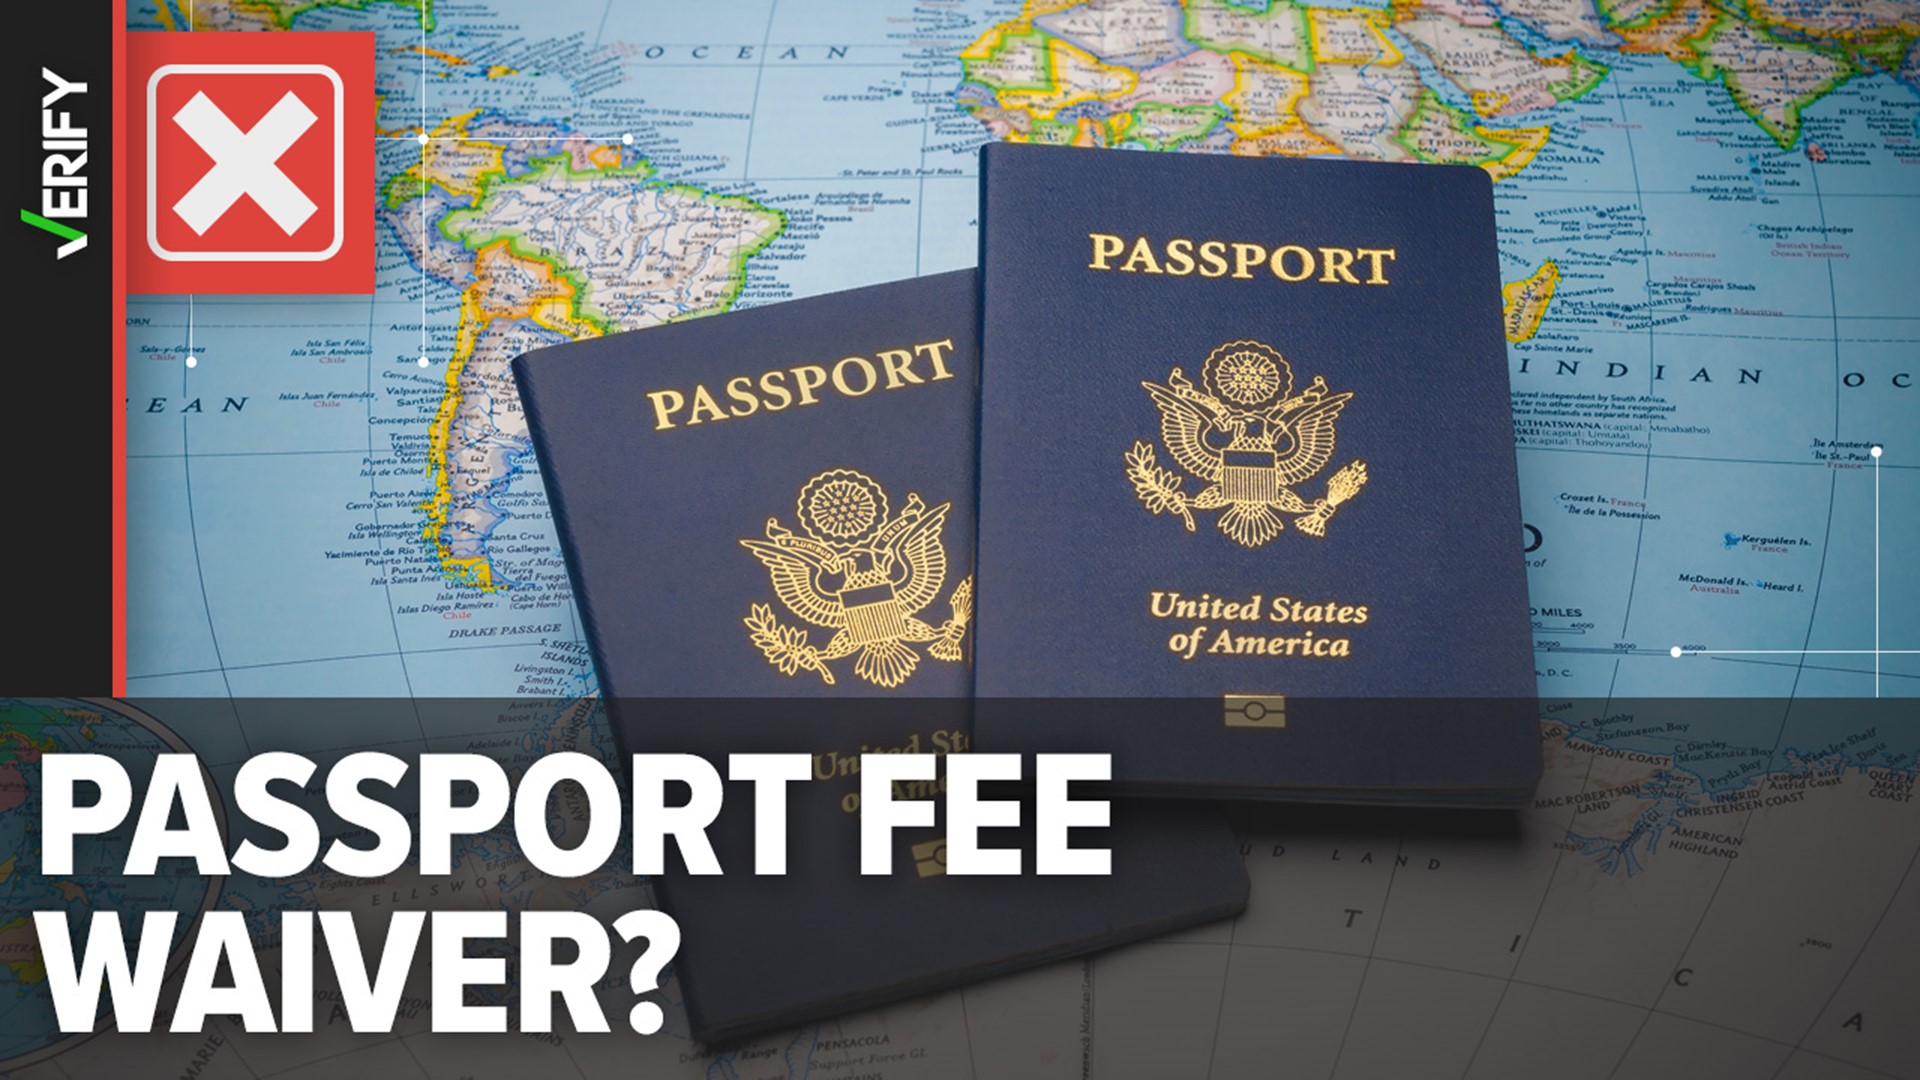 The State Department, which issues passports, says Form I-912 has nothing to do with passports. The form applies to immigration fees.